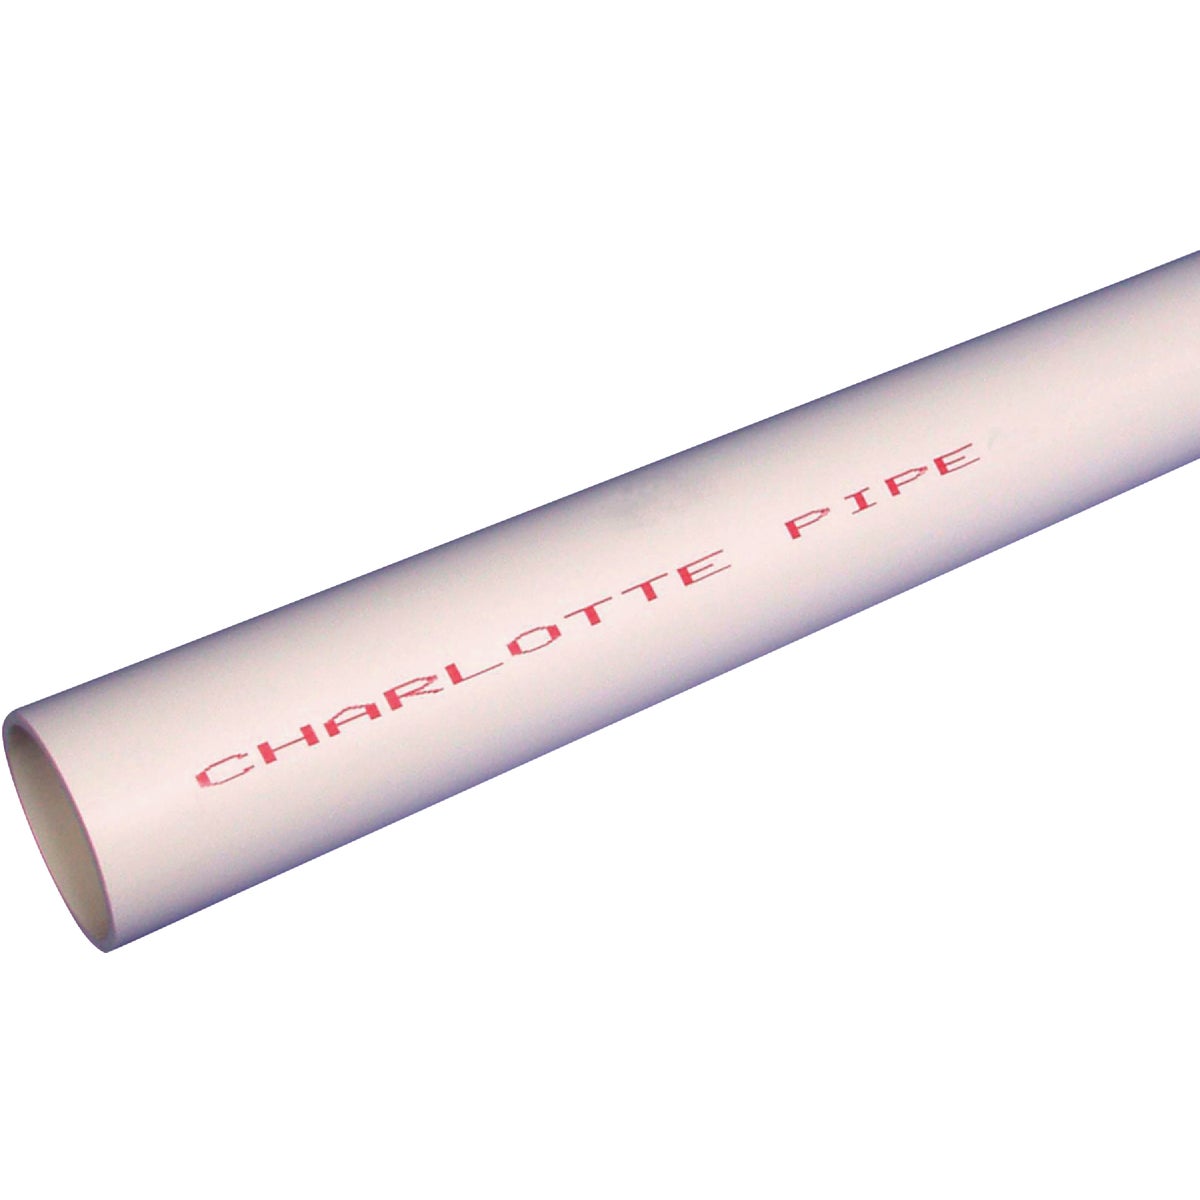 Item 413476, PVC Schedule 40 Pipe is for cold water pressure systems where temperatures 